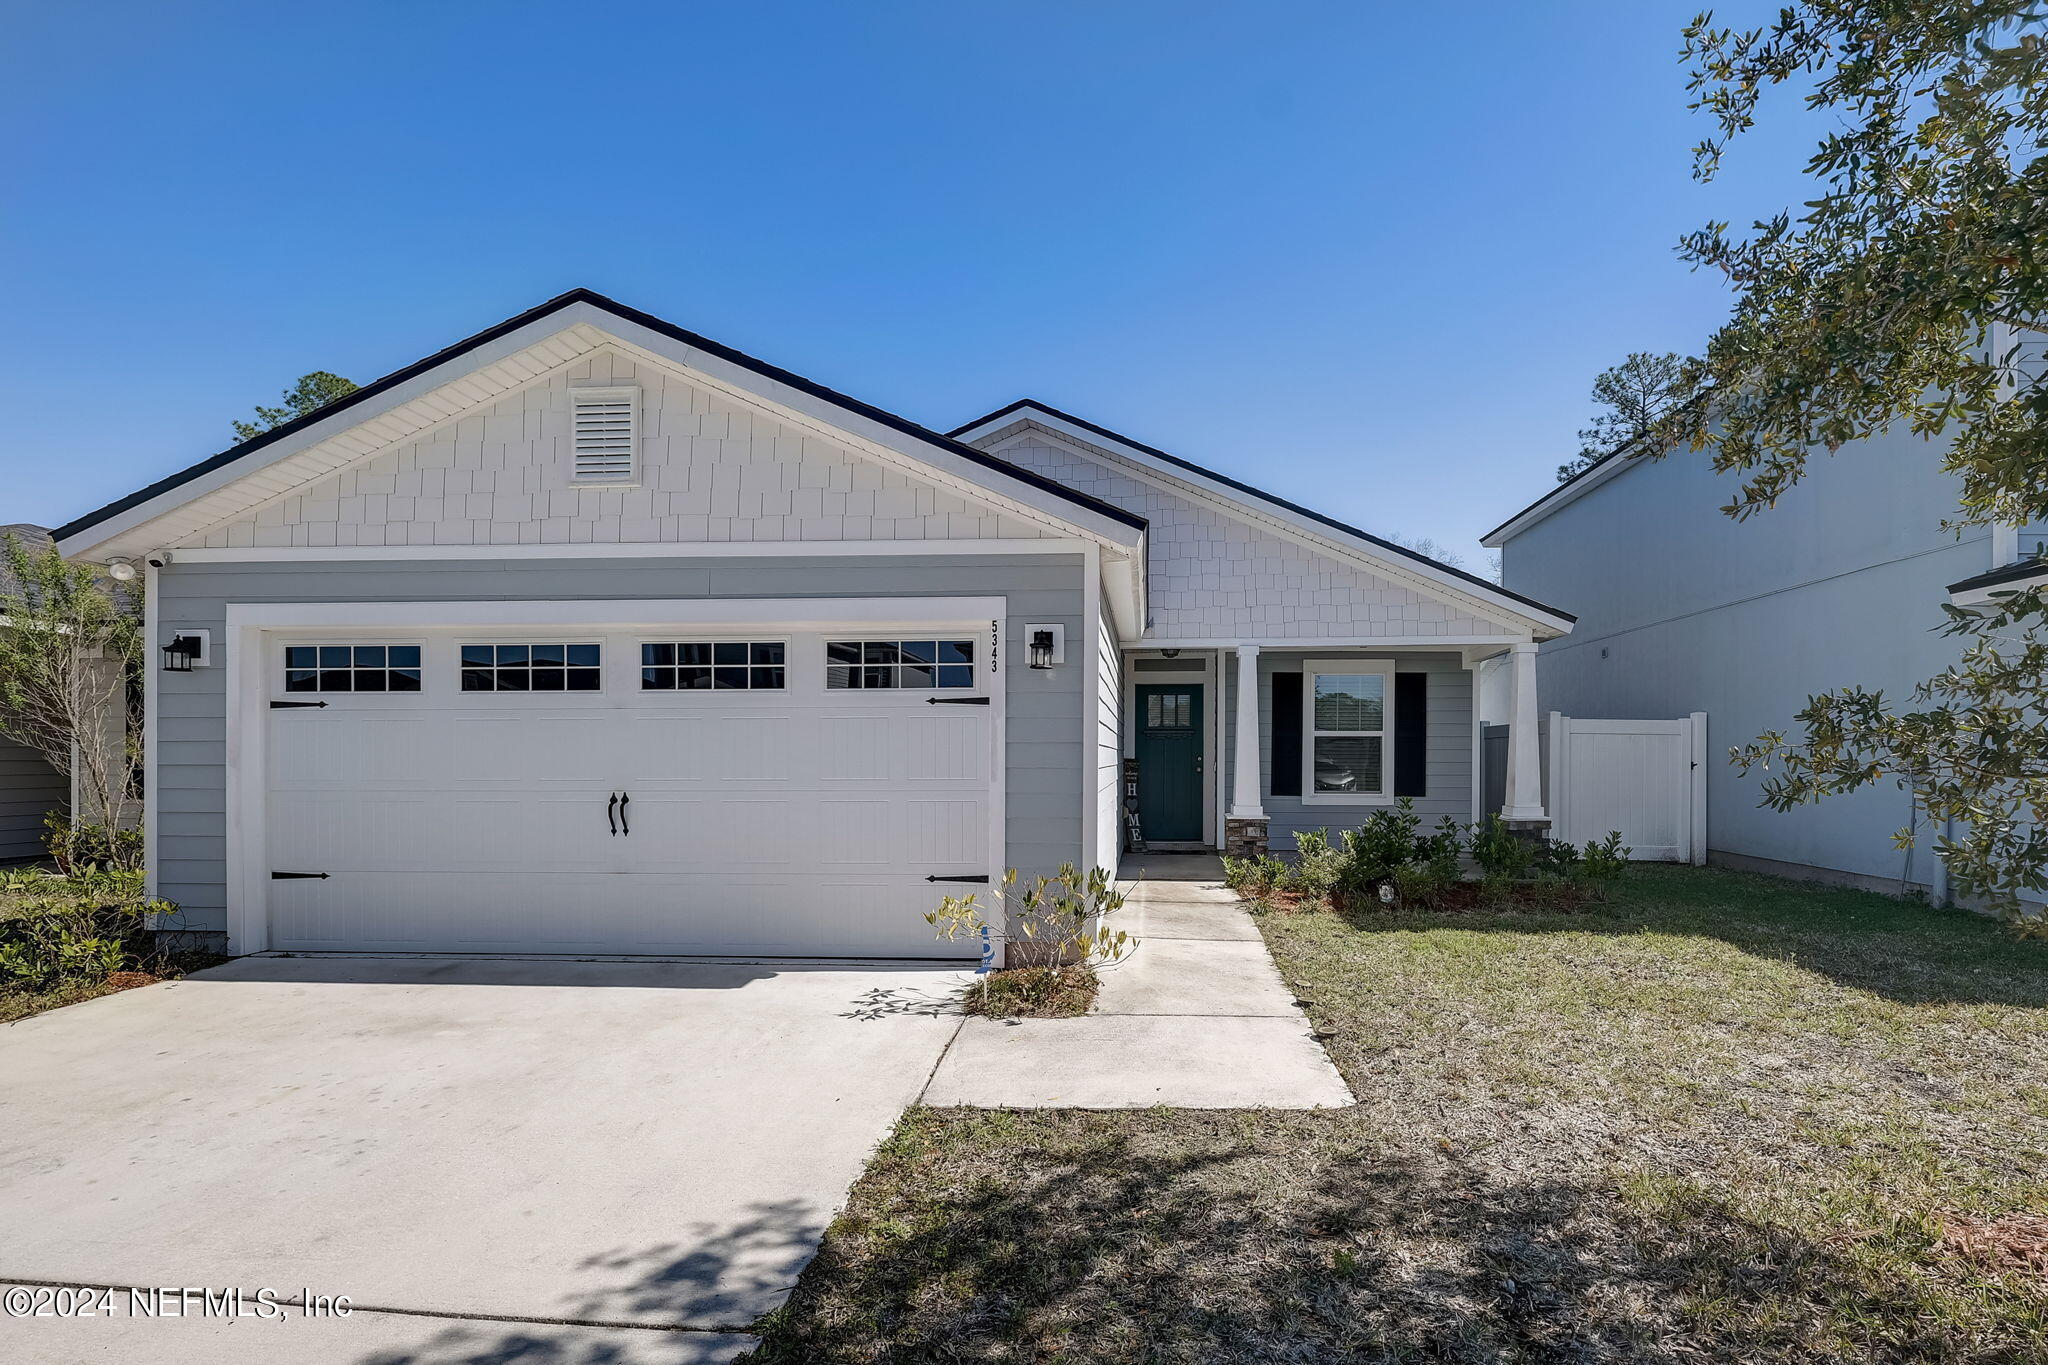 Jacksonville, FL home for sale located at 5343 WALKERS RIDGE Drive, Jacksonville, FL 32210